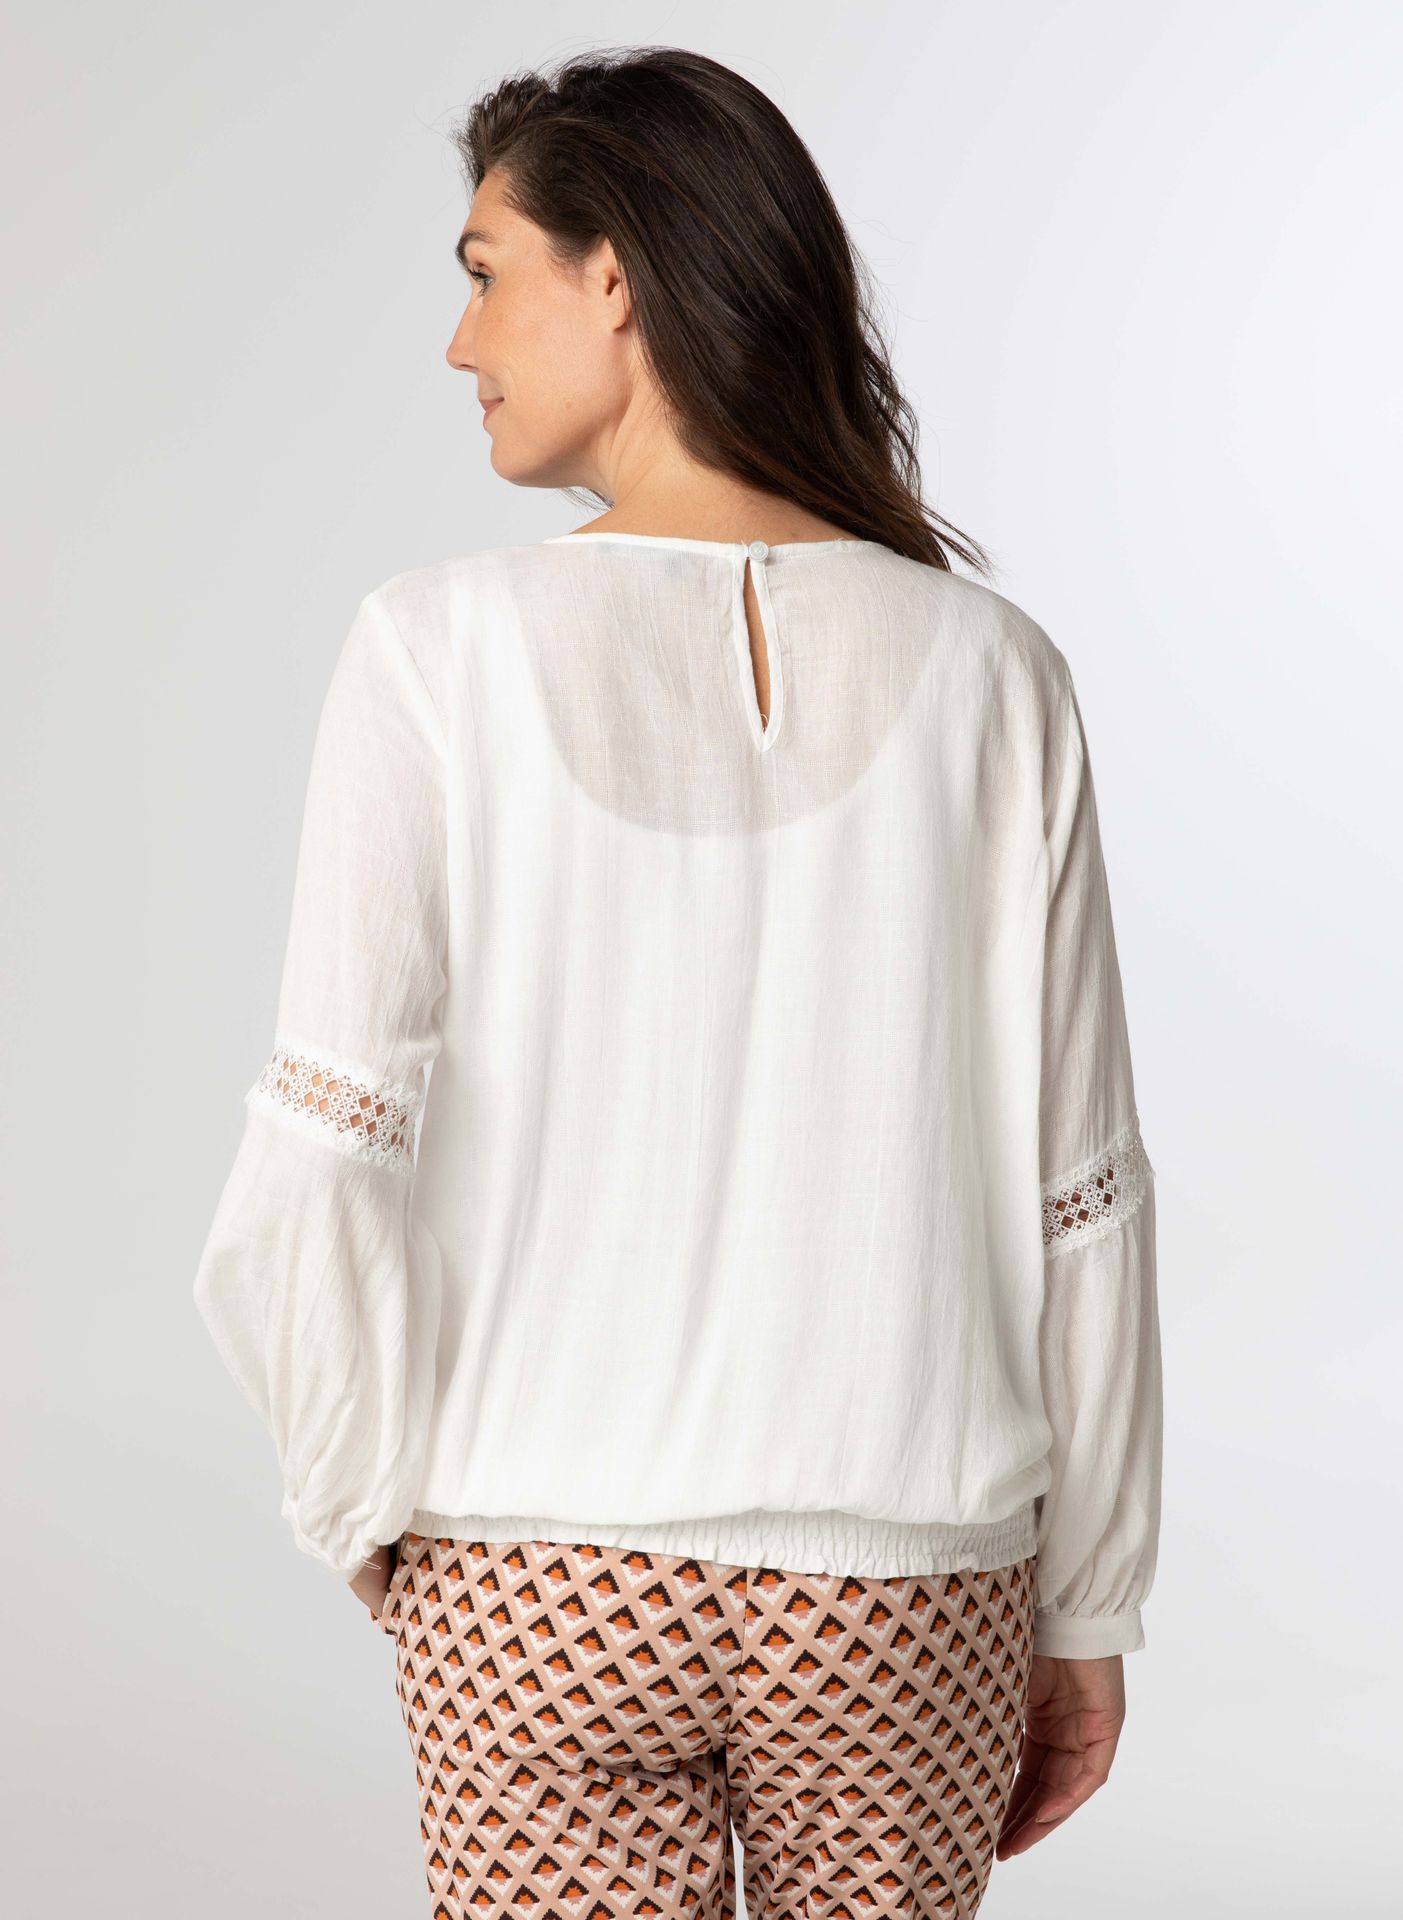 Norah Blouse wit off-white 213342-101